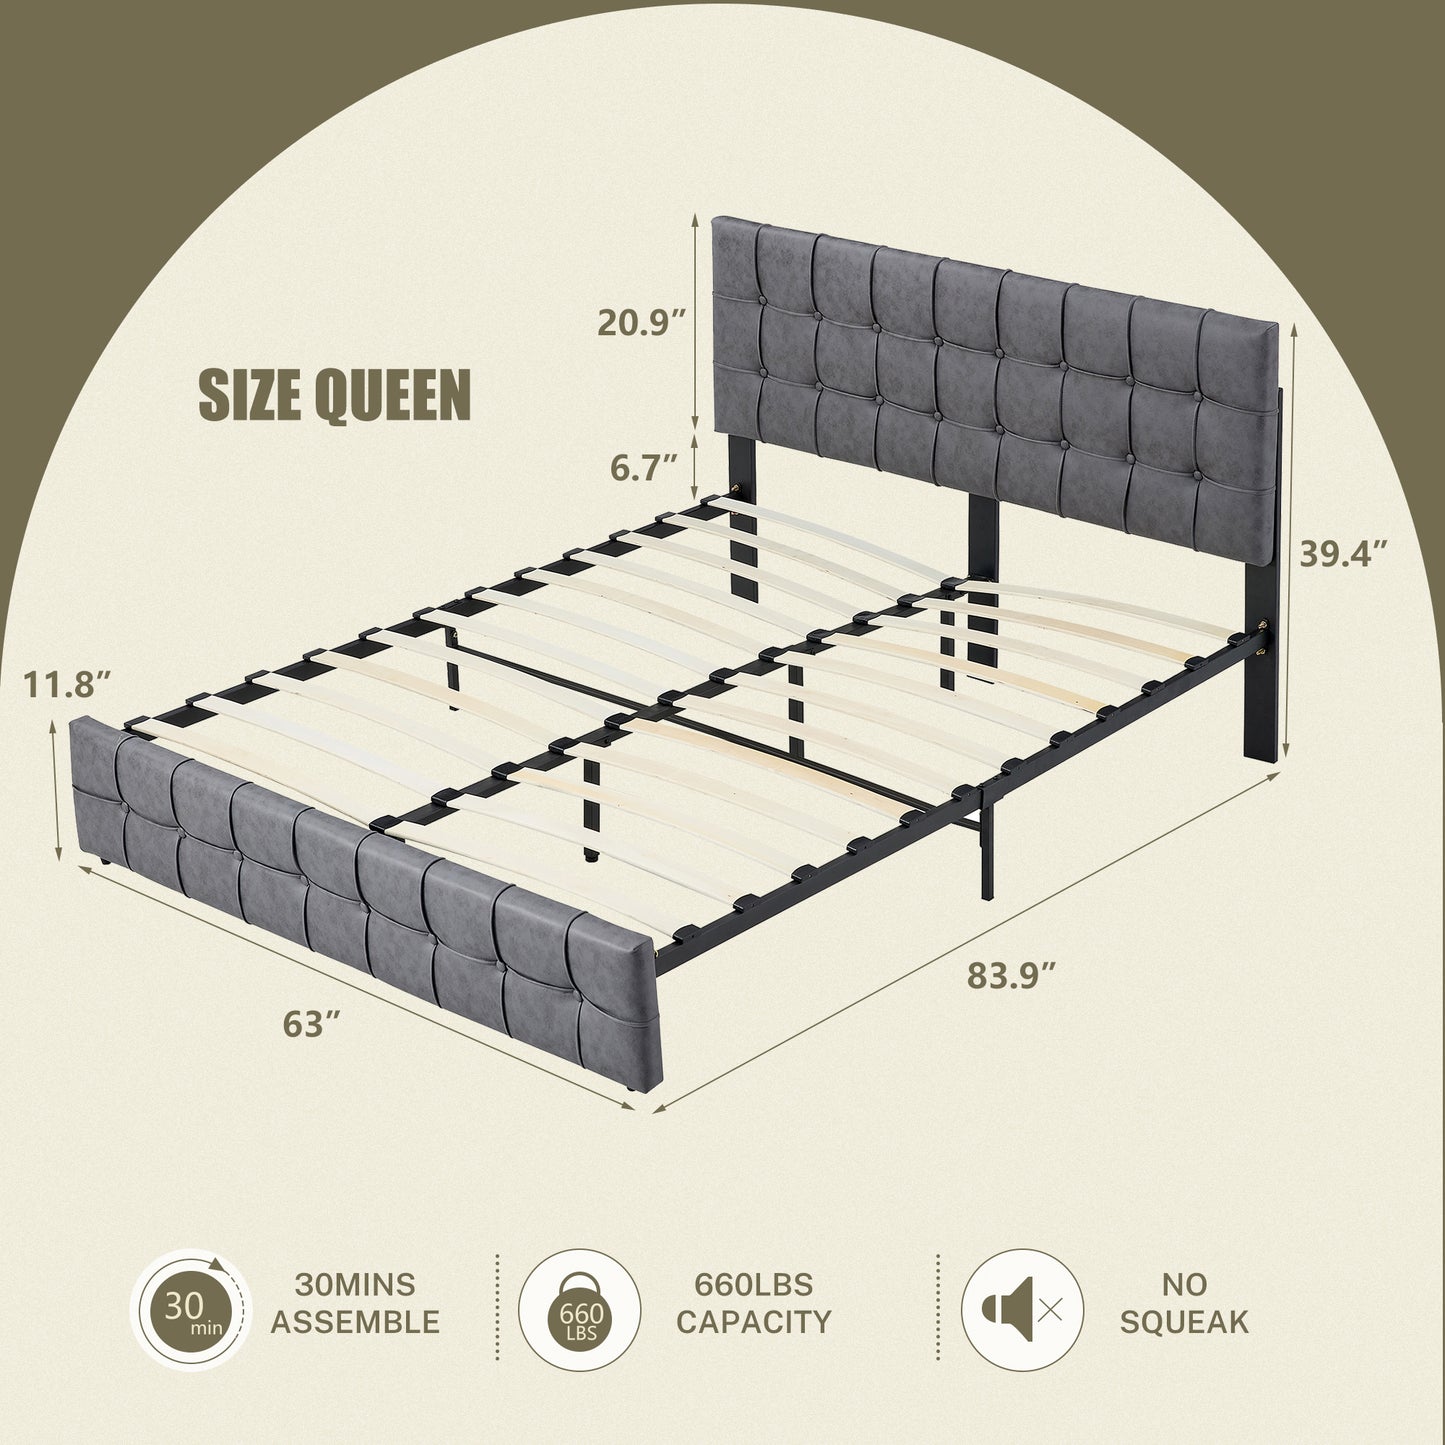 SYNGAR Queen Bed Frame, New Upgrade Queen Size Fabric Upholstered Platform Bed Frame with Button Tufted Headboard, Bedroom Furniture Metal Frame Platform Bed Frame, No Box Spring Needed, Dark Gray